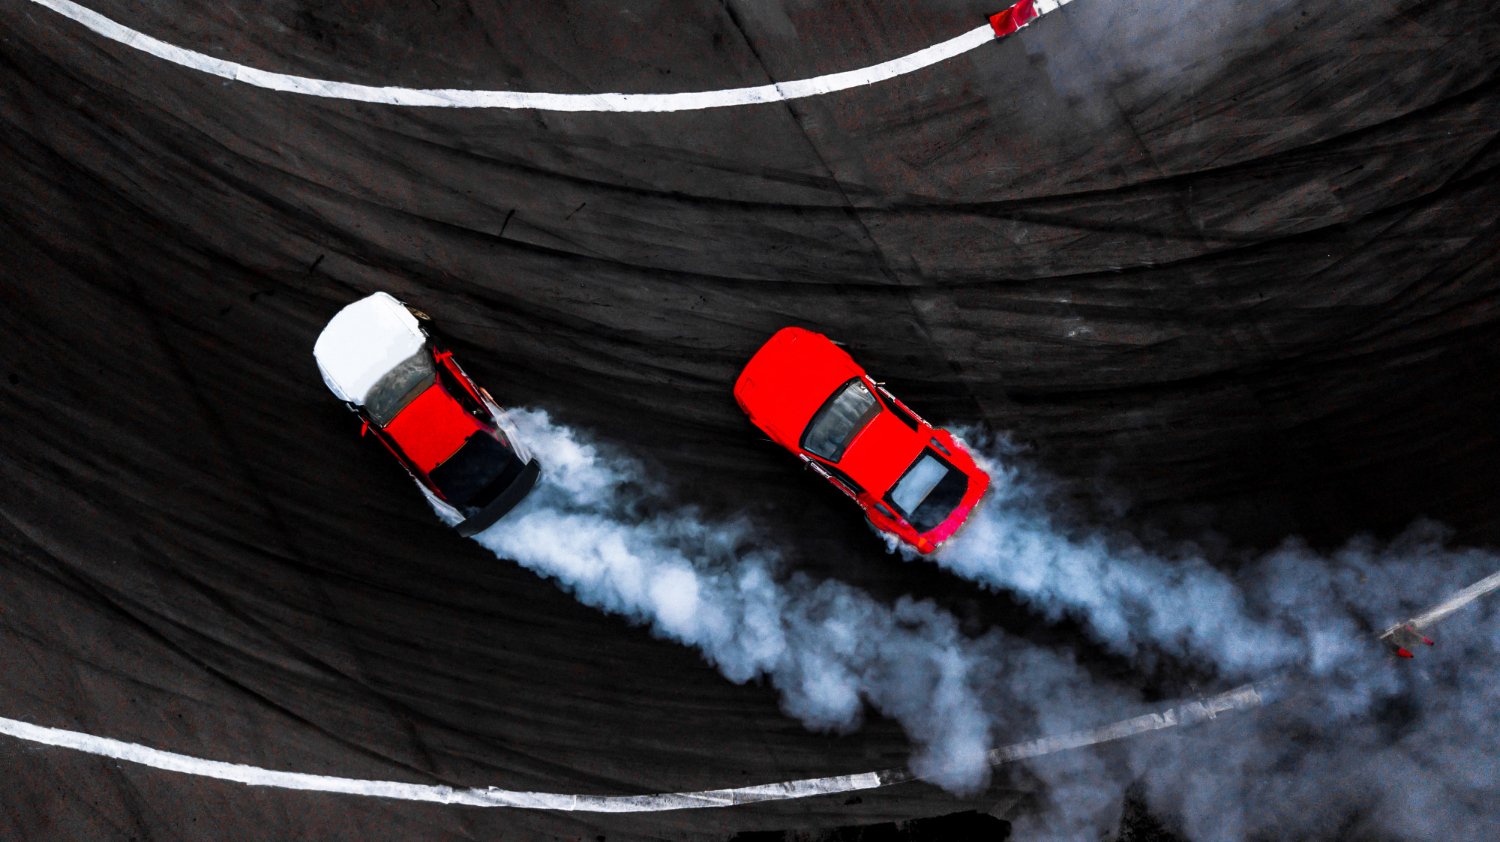 car drift battle two car drifting battle race track with smoke aerial view